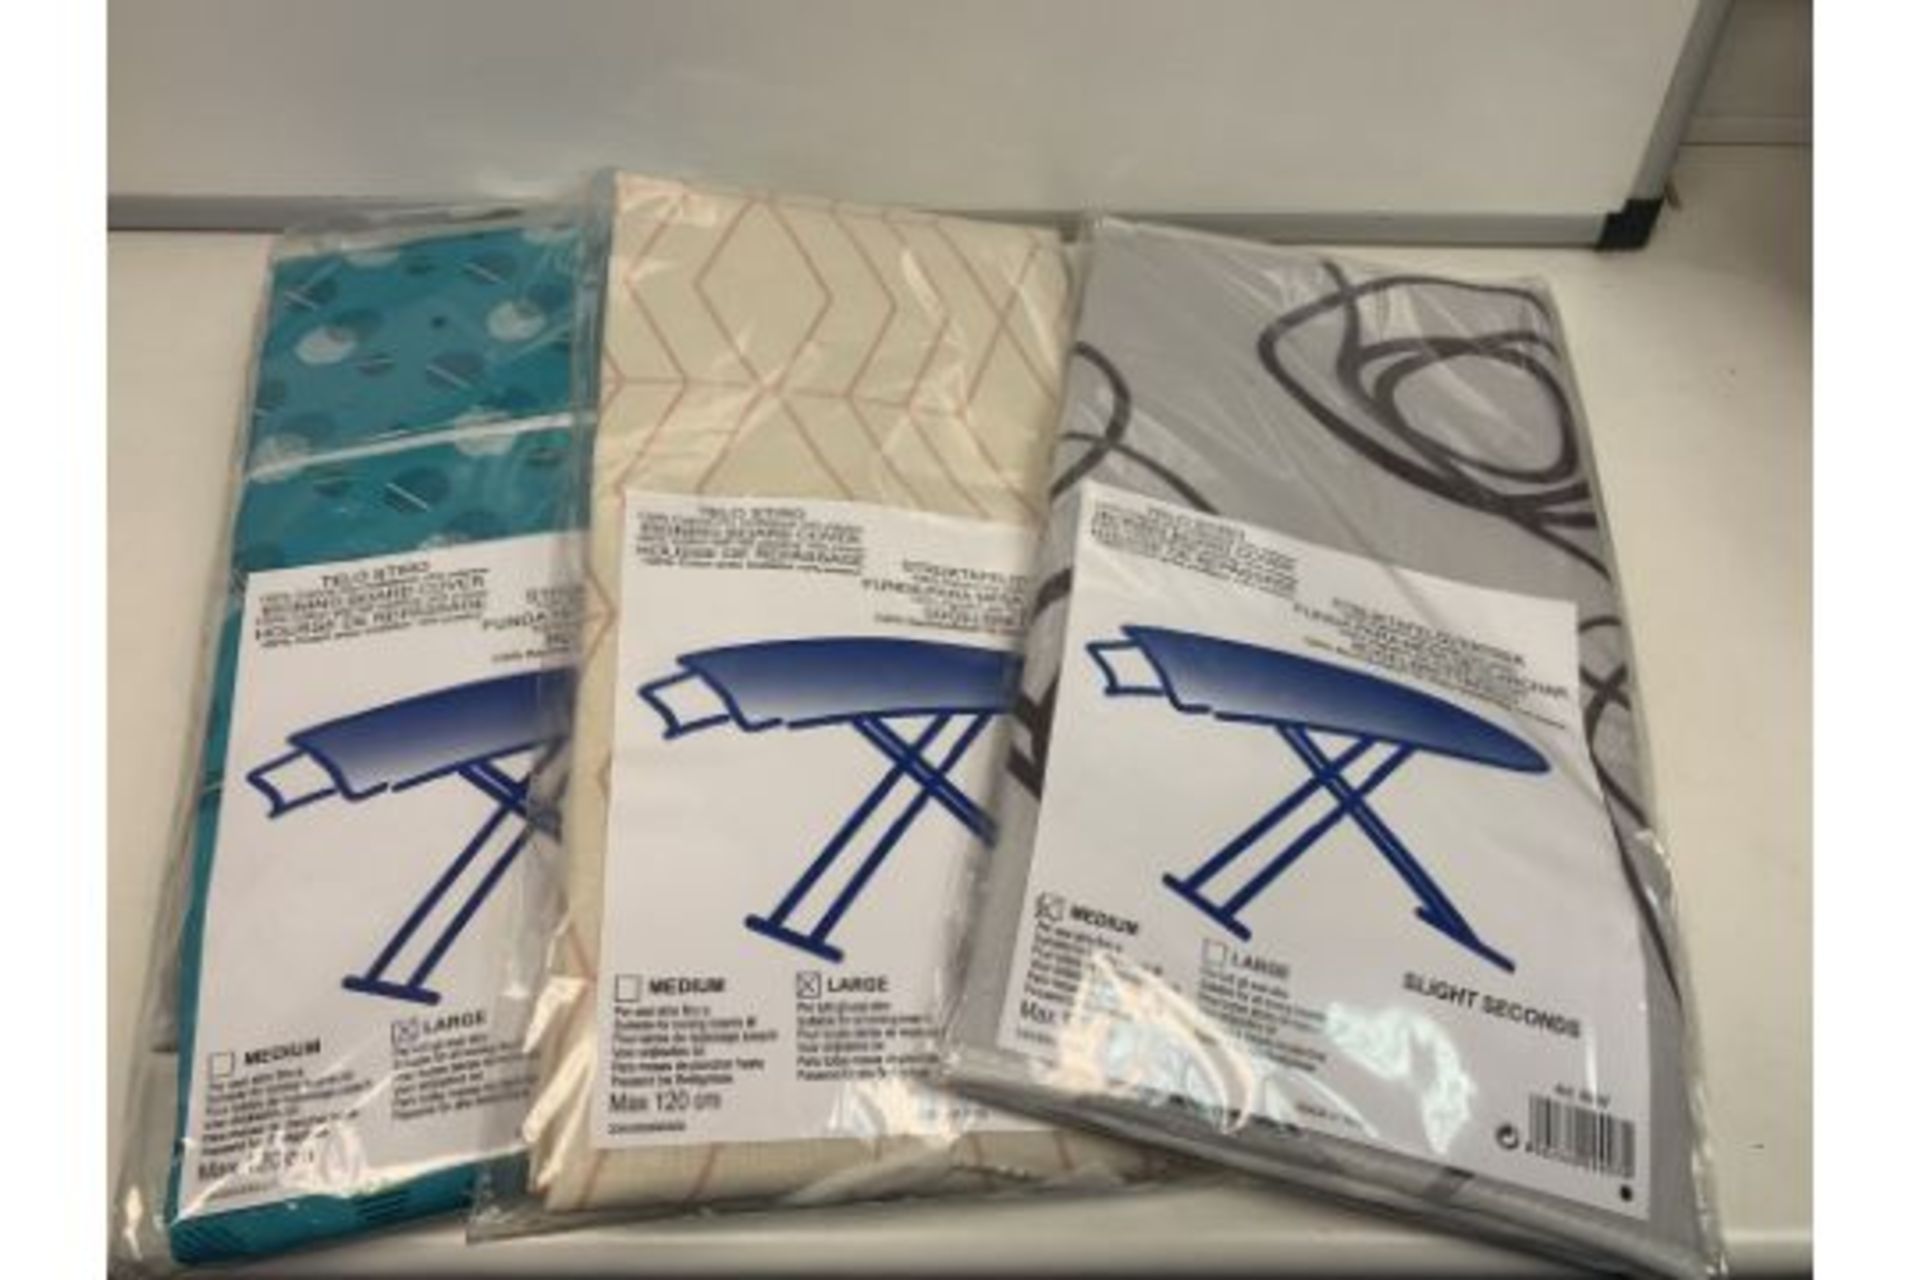 30 X NEW SEALED LUXURY IRONING BOARD COVERS IN VARIOUS STYLES/DESIGNS